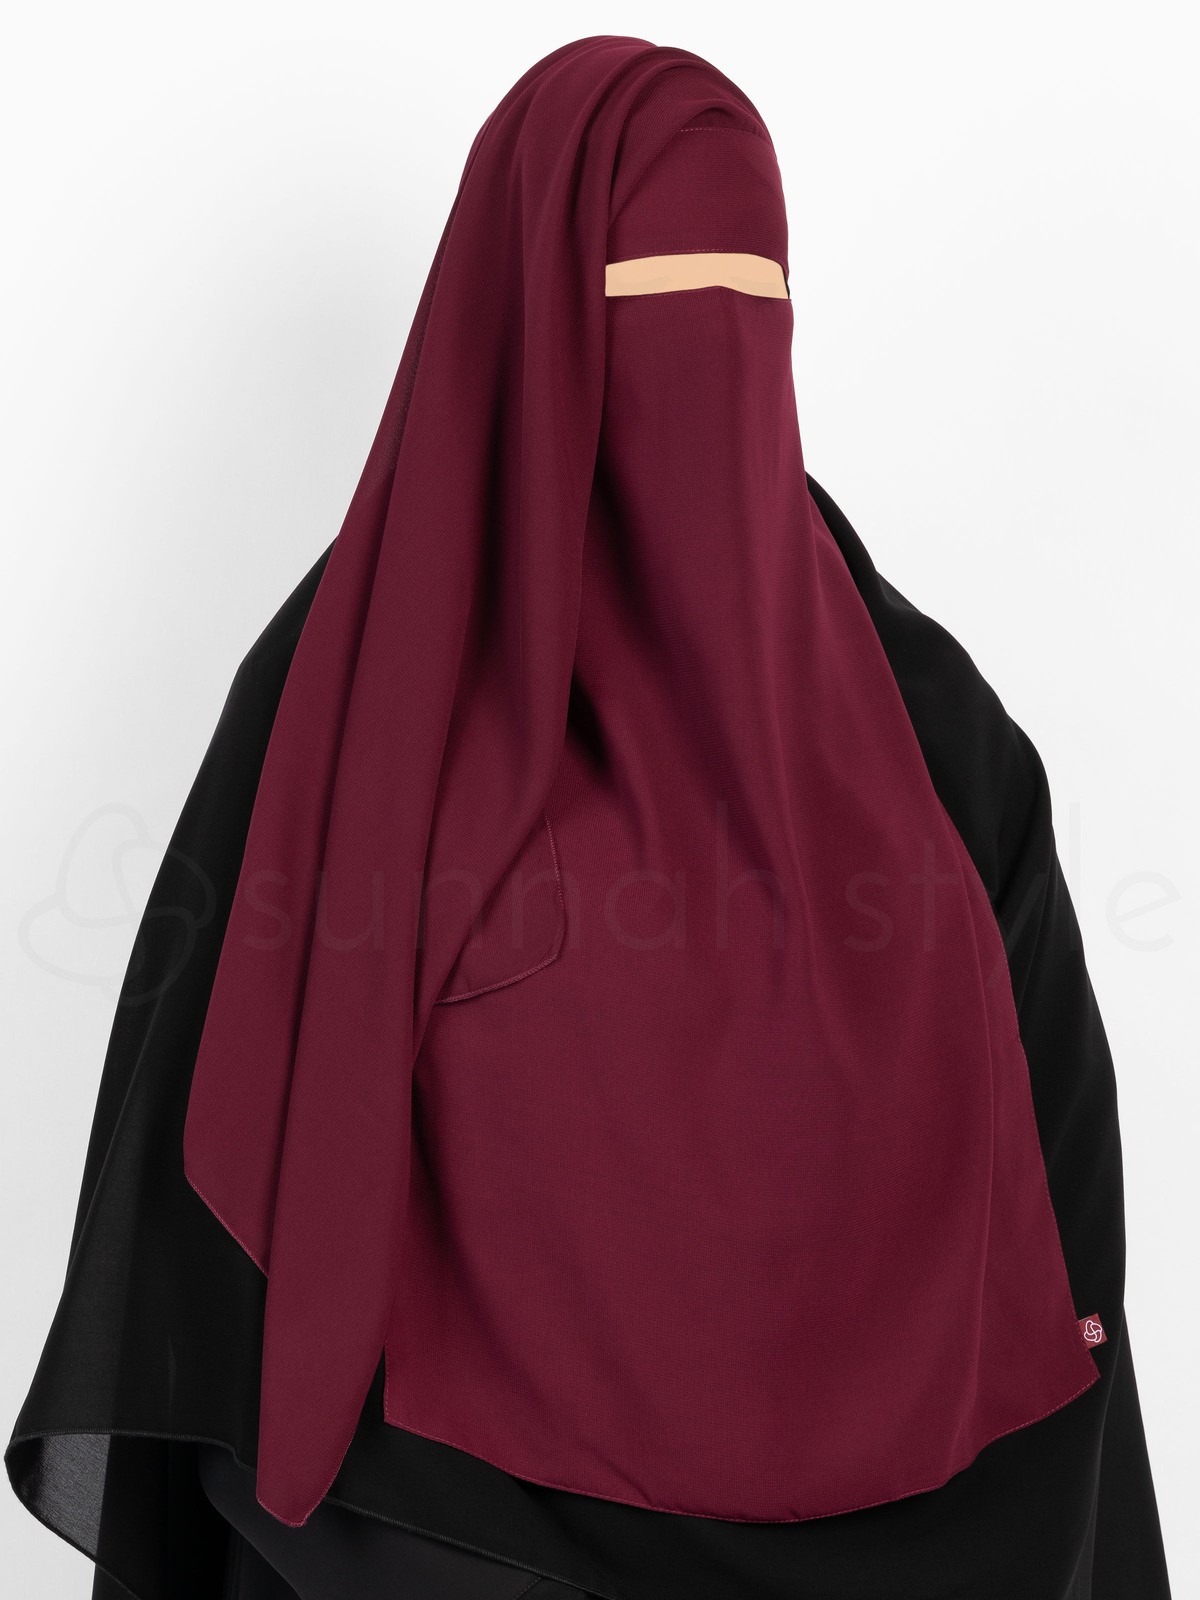 Sunnah Style - Long Two Layer Niqab (Burgundy)